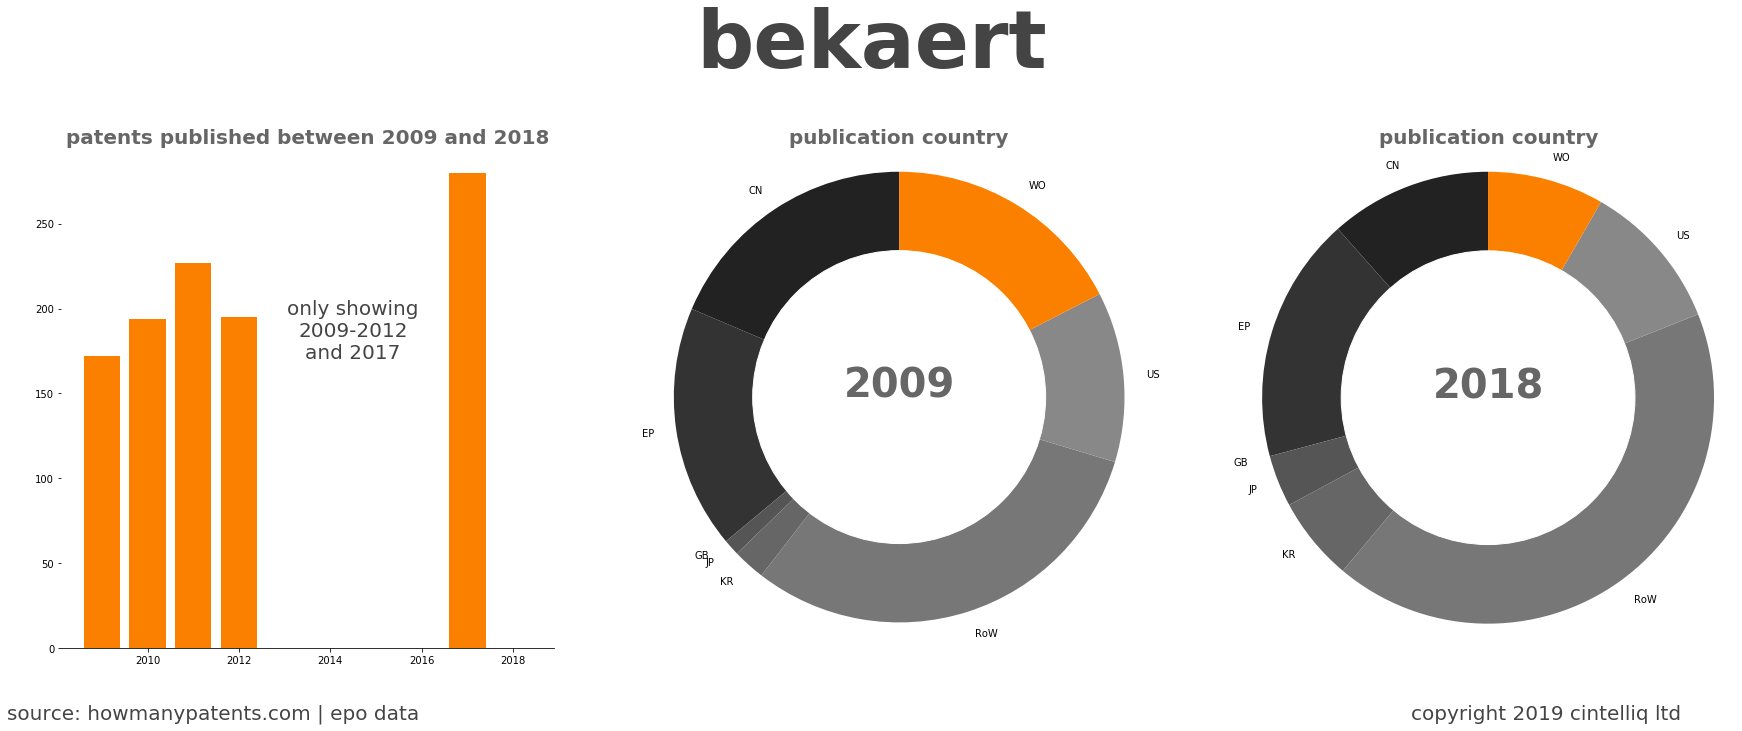 summary of patents for Bekaert